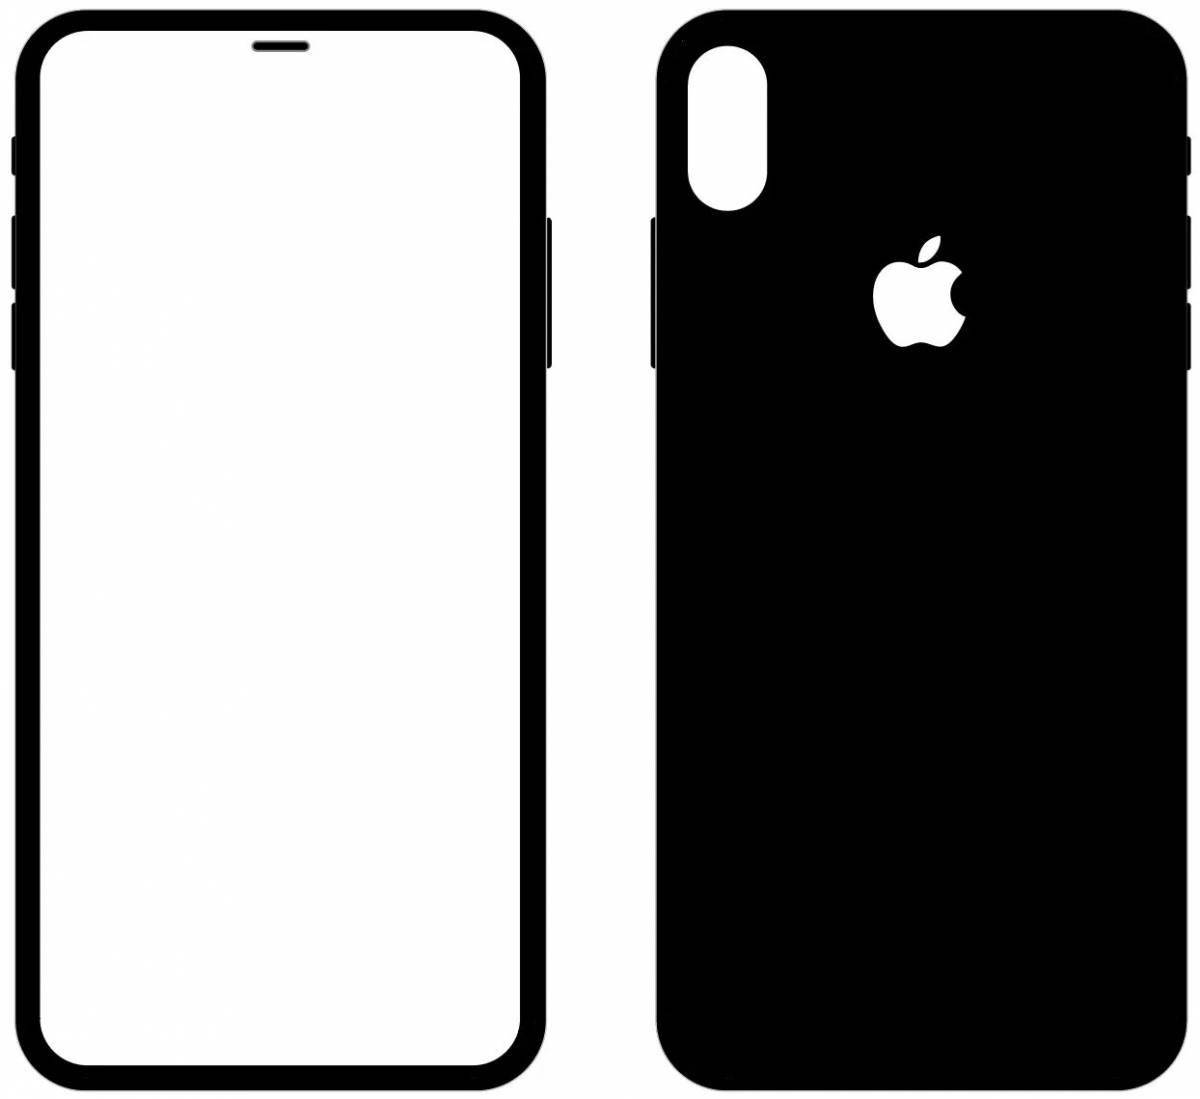 Funny iphone case coloring page